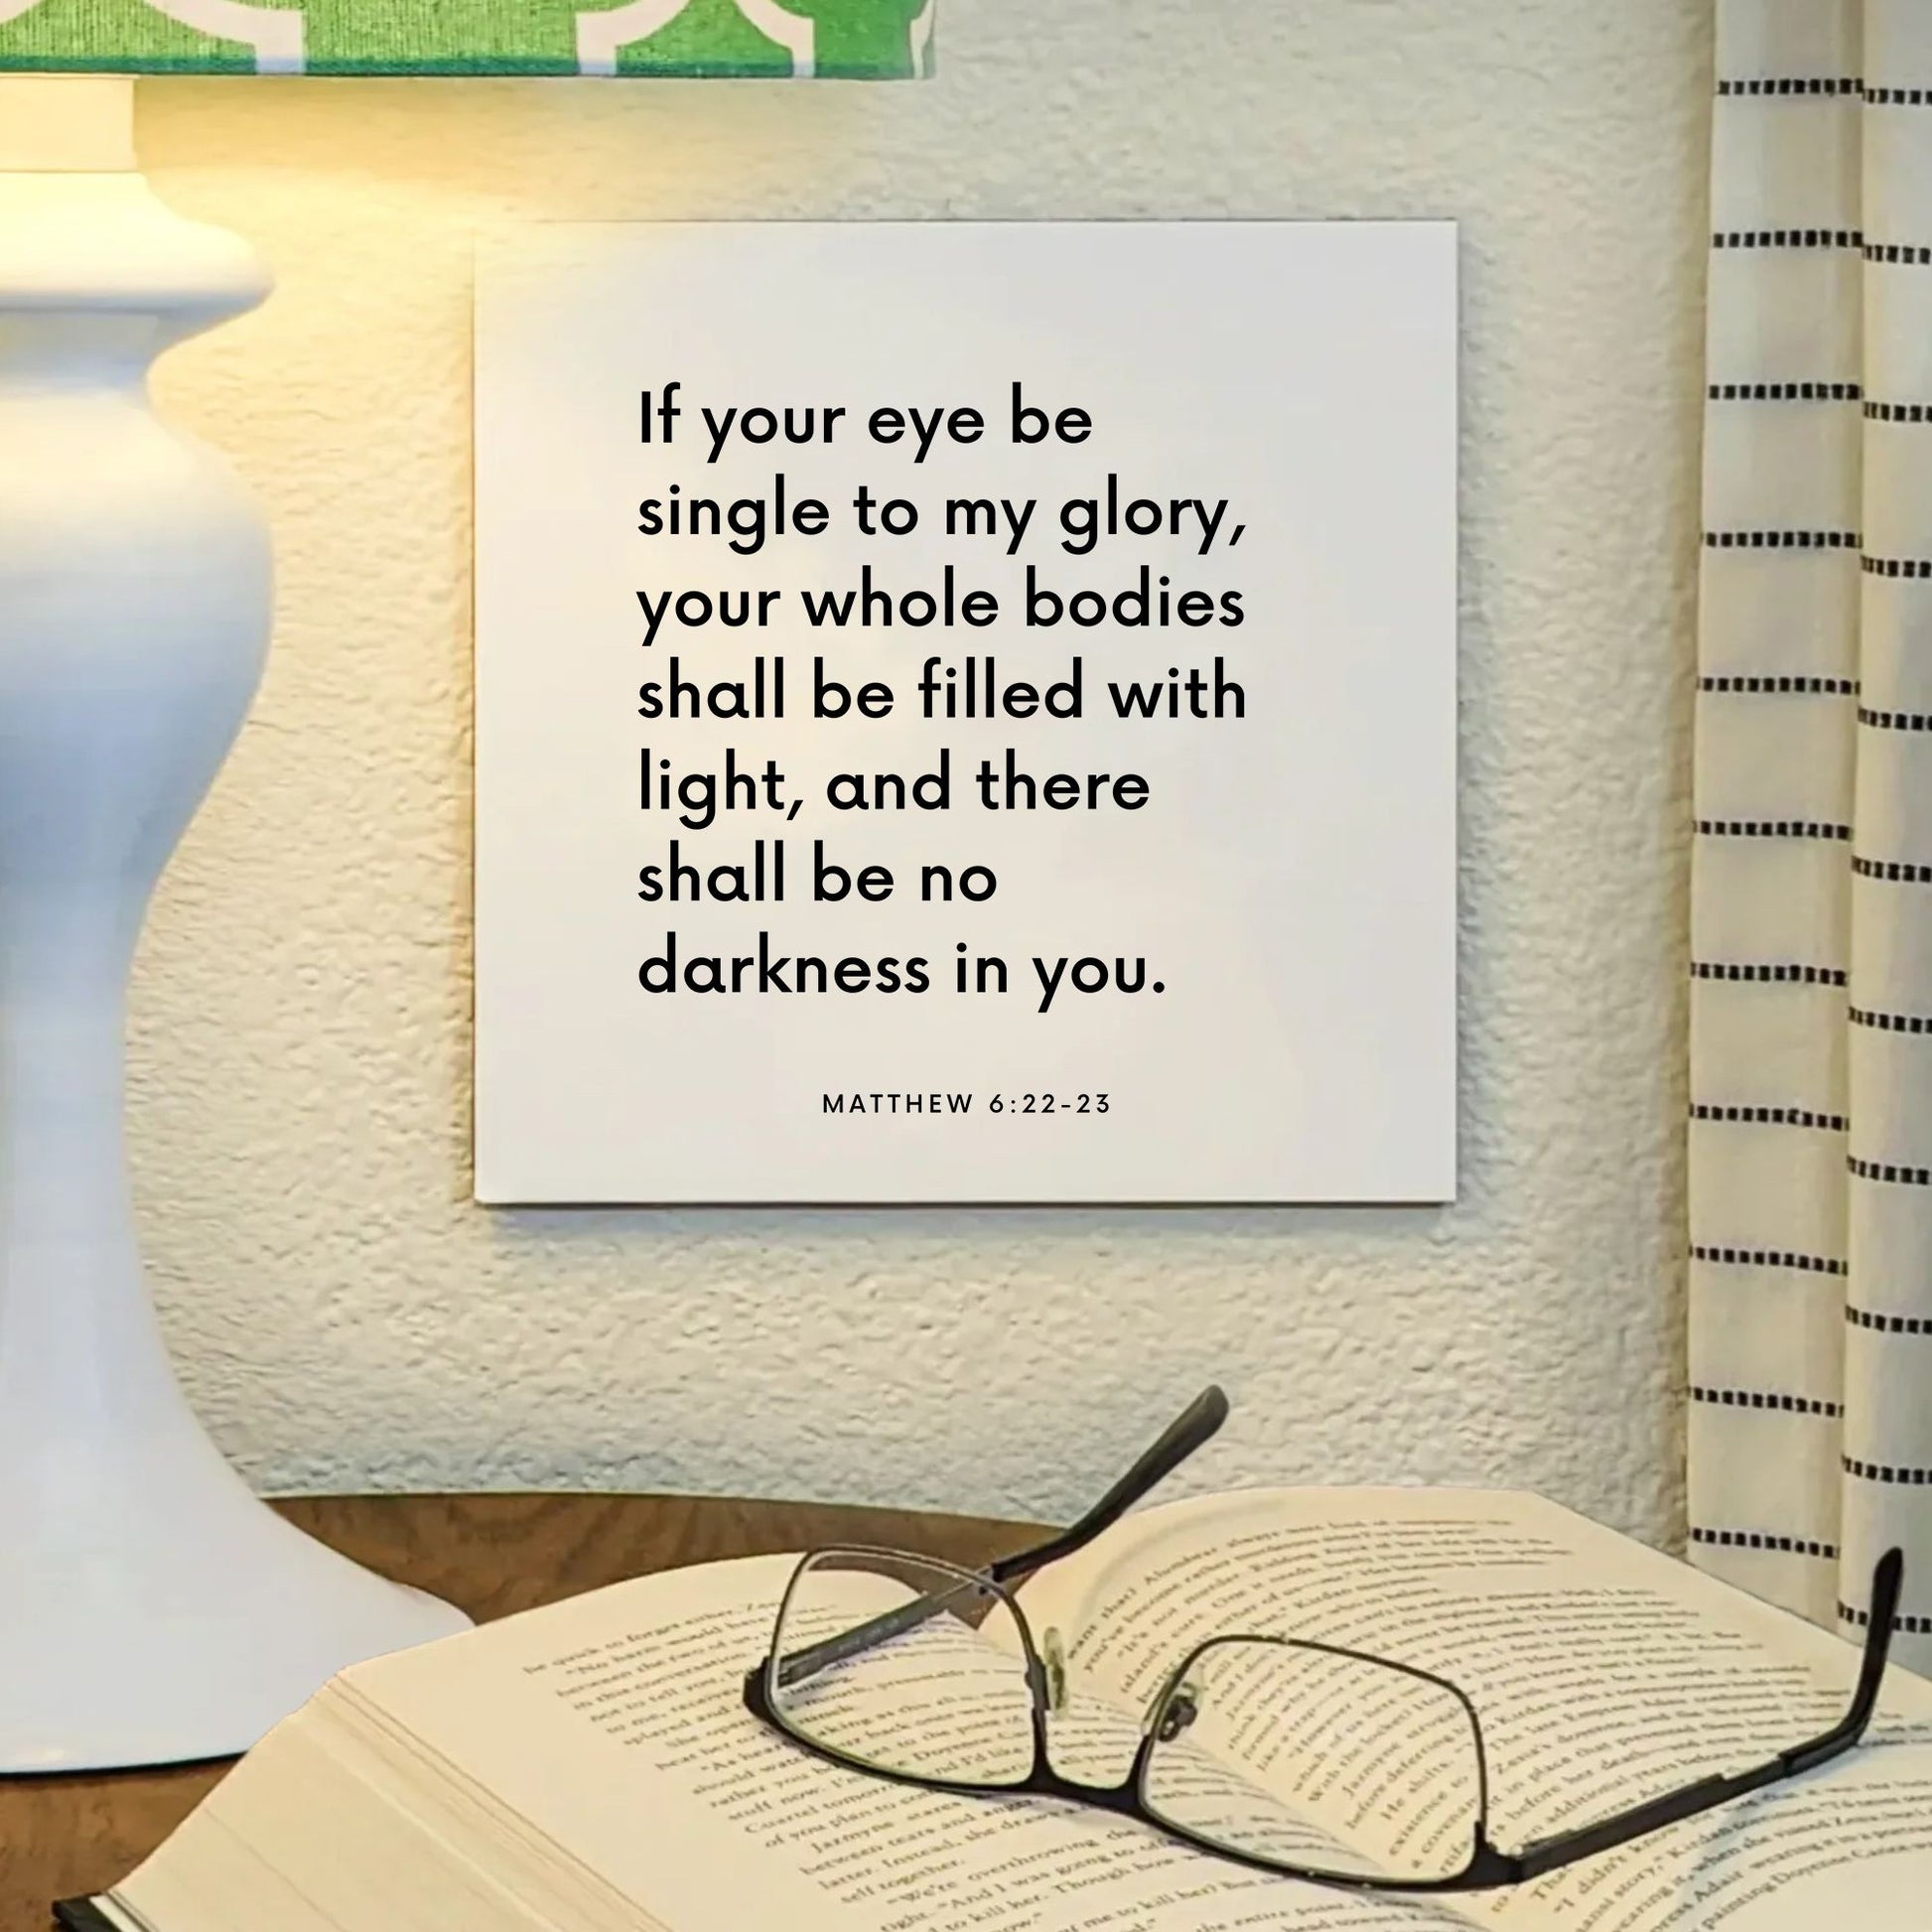 Lamp mouting of the scripture tile for Matthew 6:22-23 - "If your eye be single to my glory"